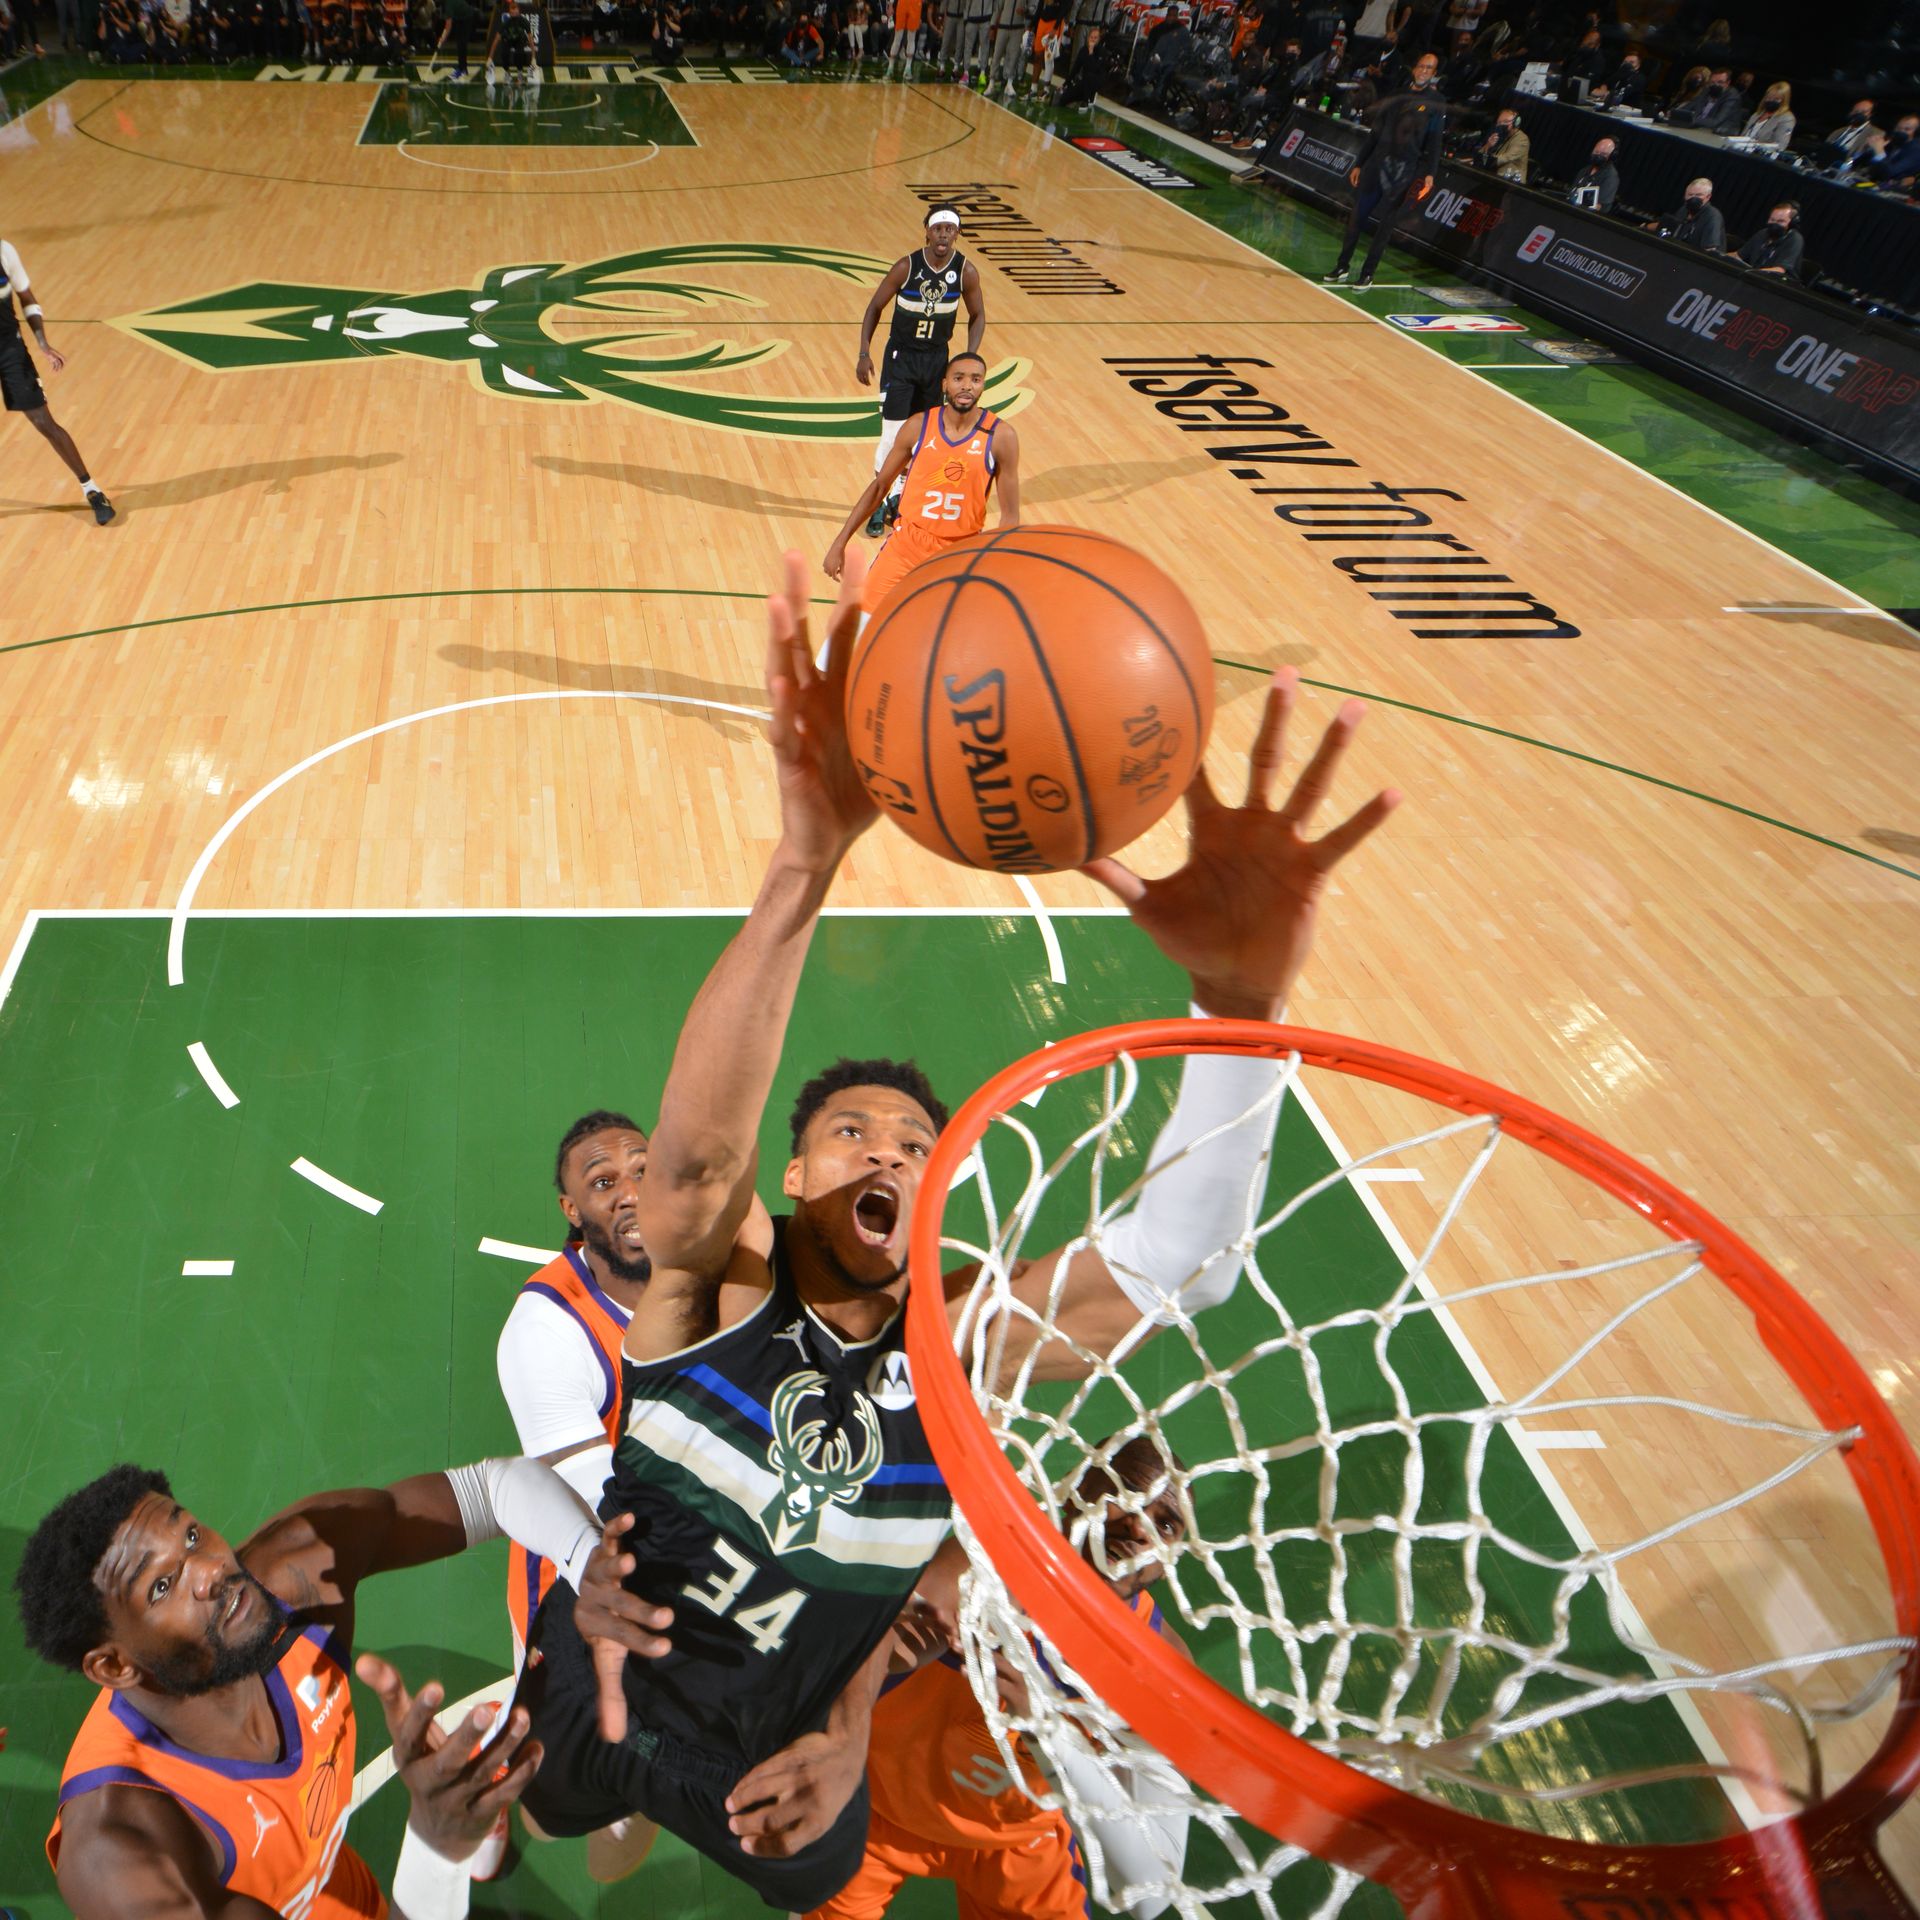 Giannis Antetokounmpo, in a green jersey, #34 of the Milwaukee Bucks, jumps to dunk a basketball into a hoop above Phoenix Suns players in orange uniforms.